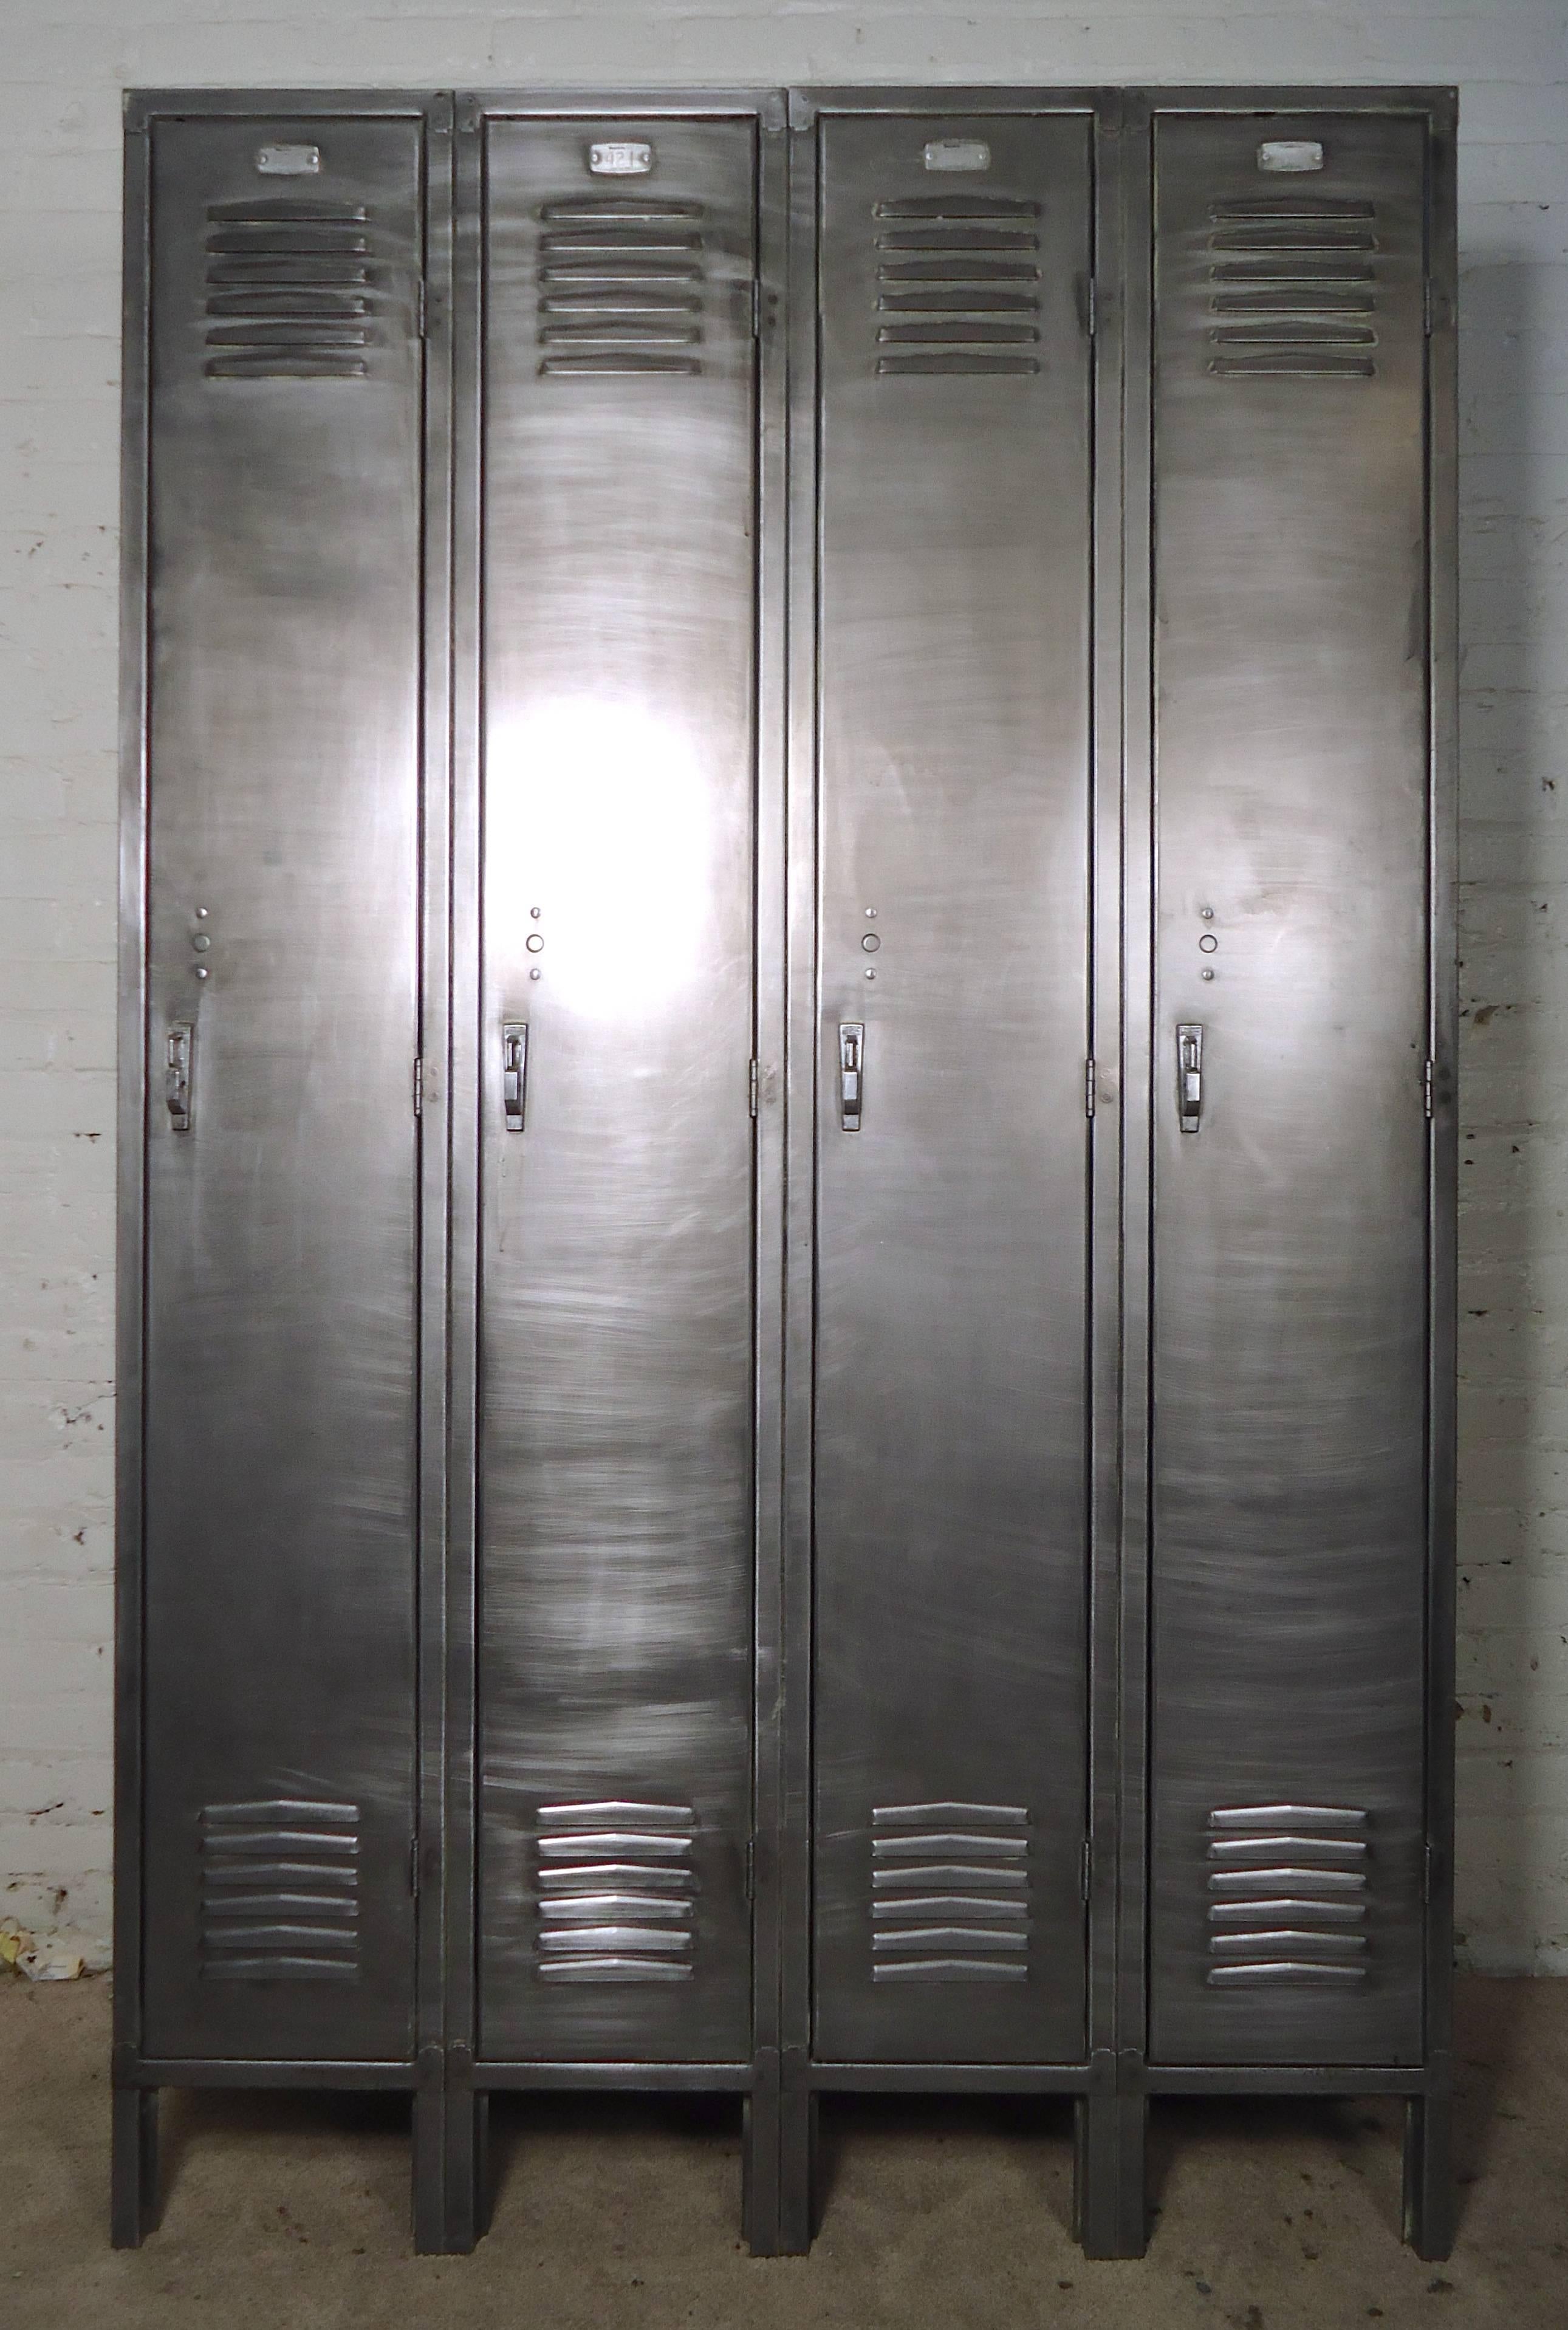 Tall standing locker with four units containing coat hooks and shelf. Outside has been restored in a bare metal style finish. Makes a unique closet for your modern home.

(Please confirm item location - NY or NJ - with dealer)
